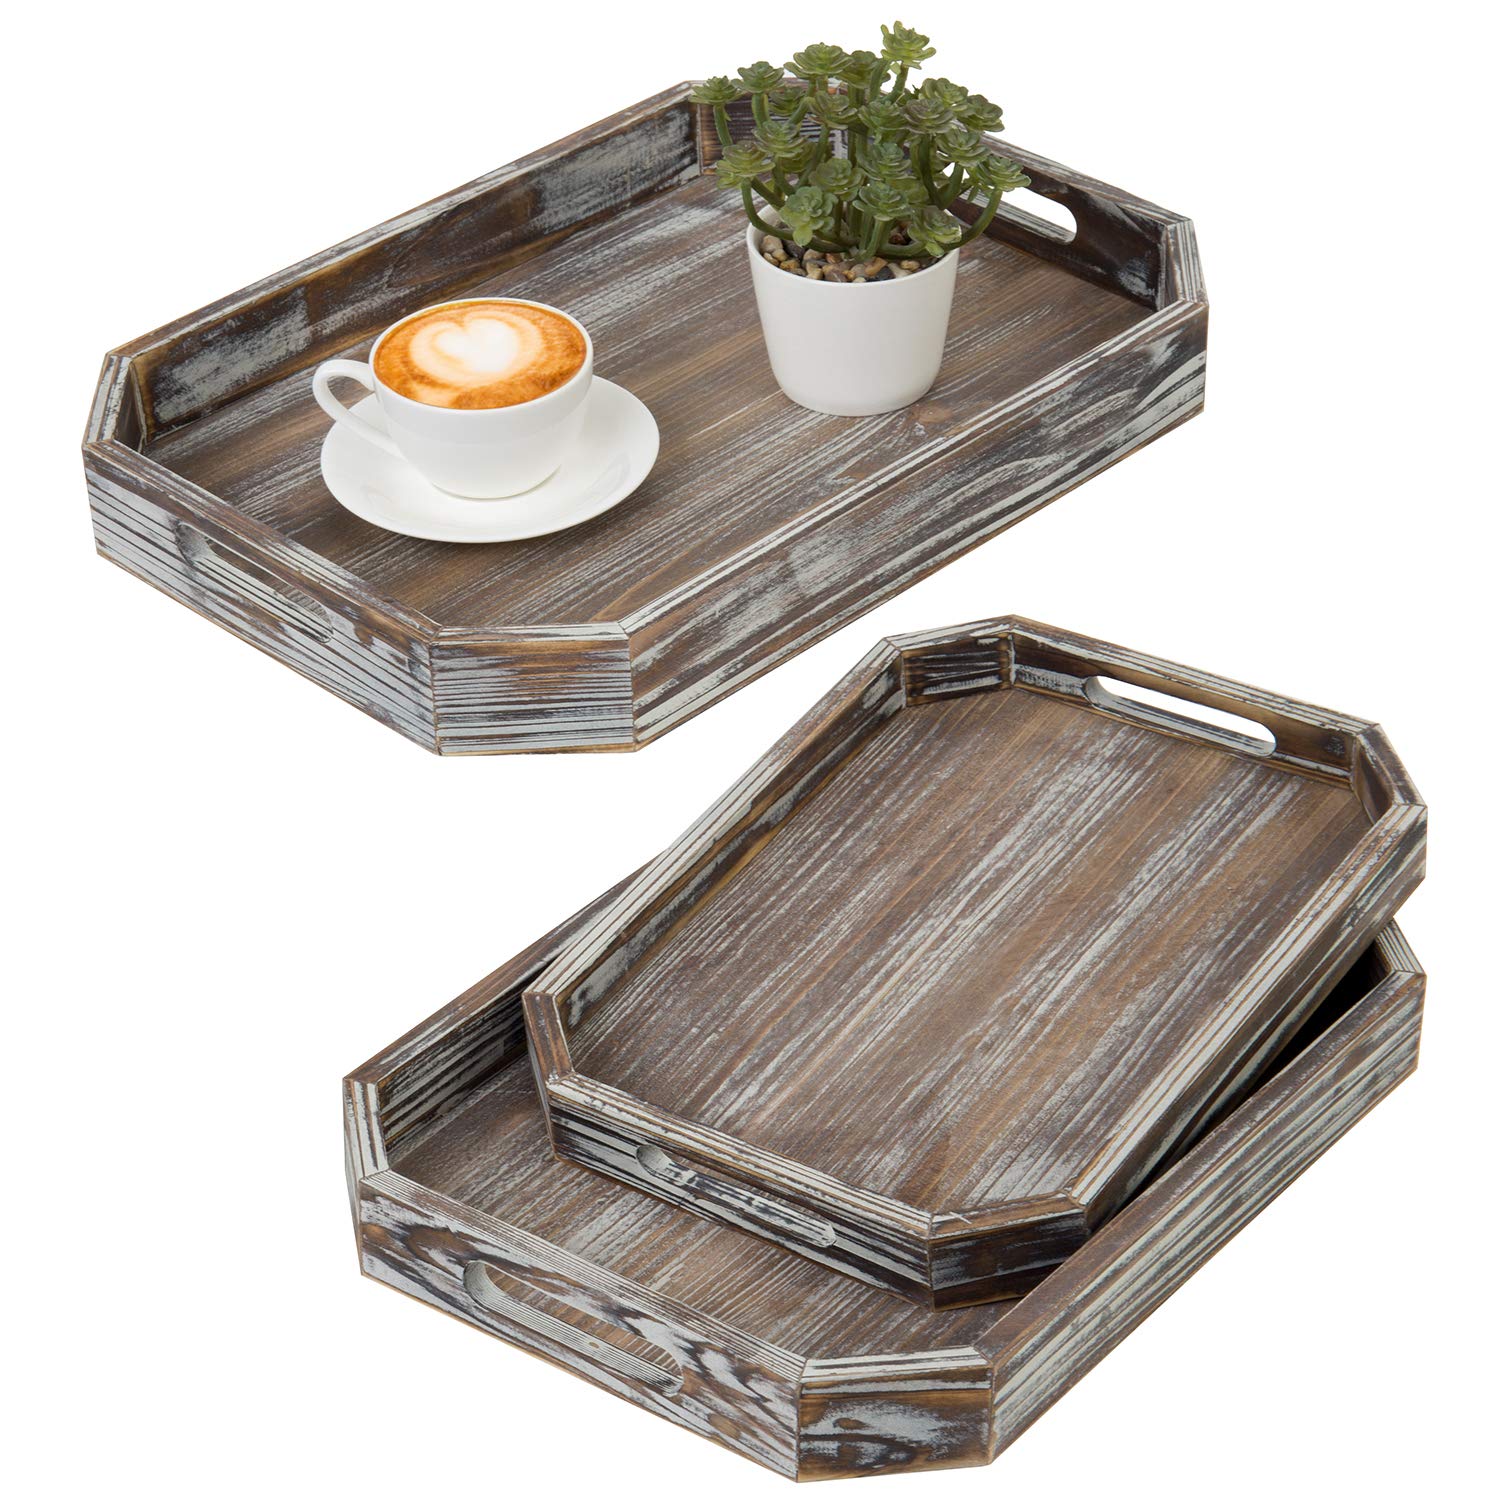 MyGift Set of 3 Rustic Torched Wood Serving Tray with Handles, Nesting Angle Edged Breakfast Trays for Bed